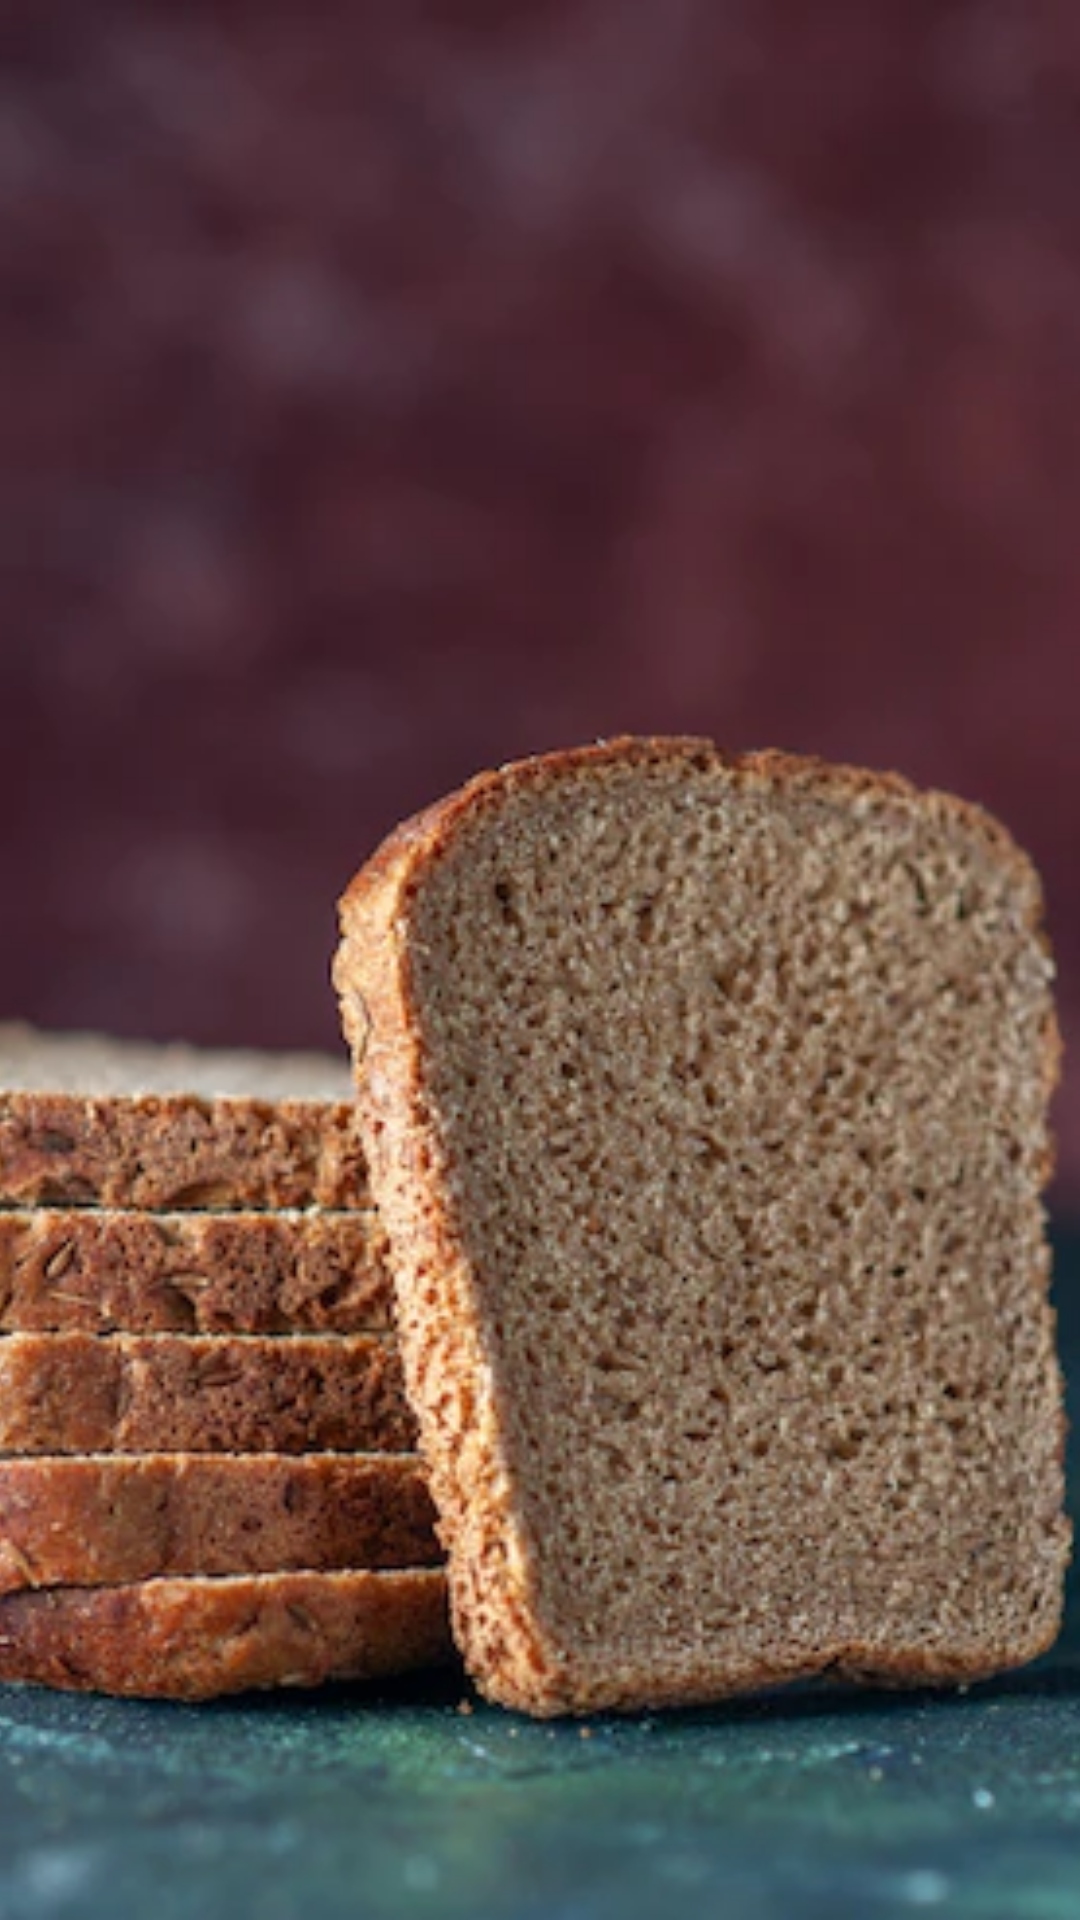 Brown bread can reduce the risk of heart disease; check 5 other benefits